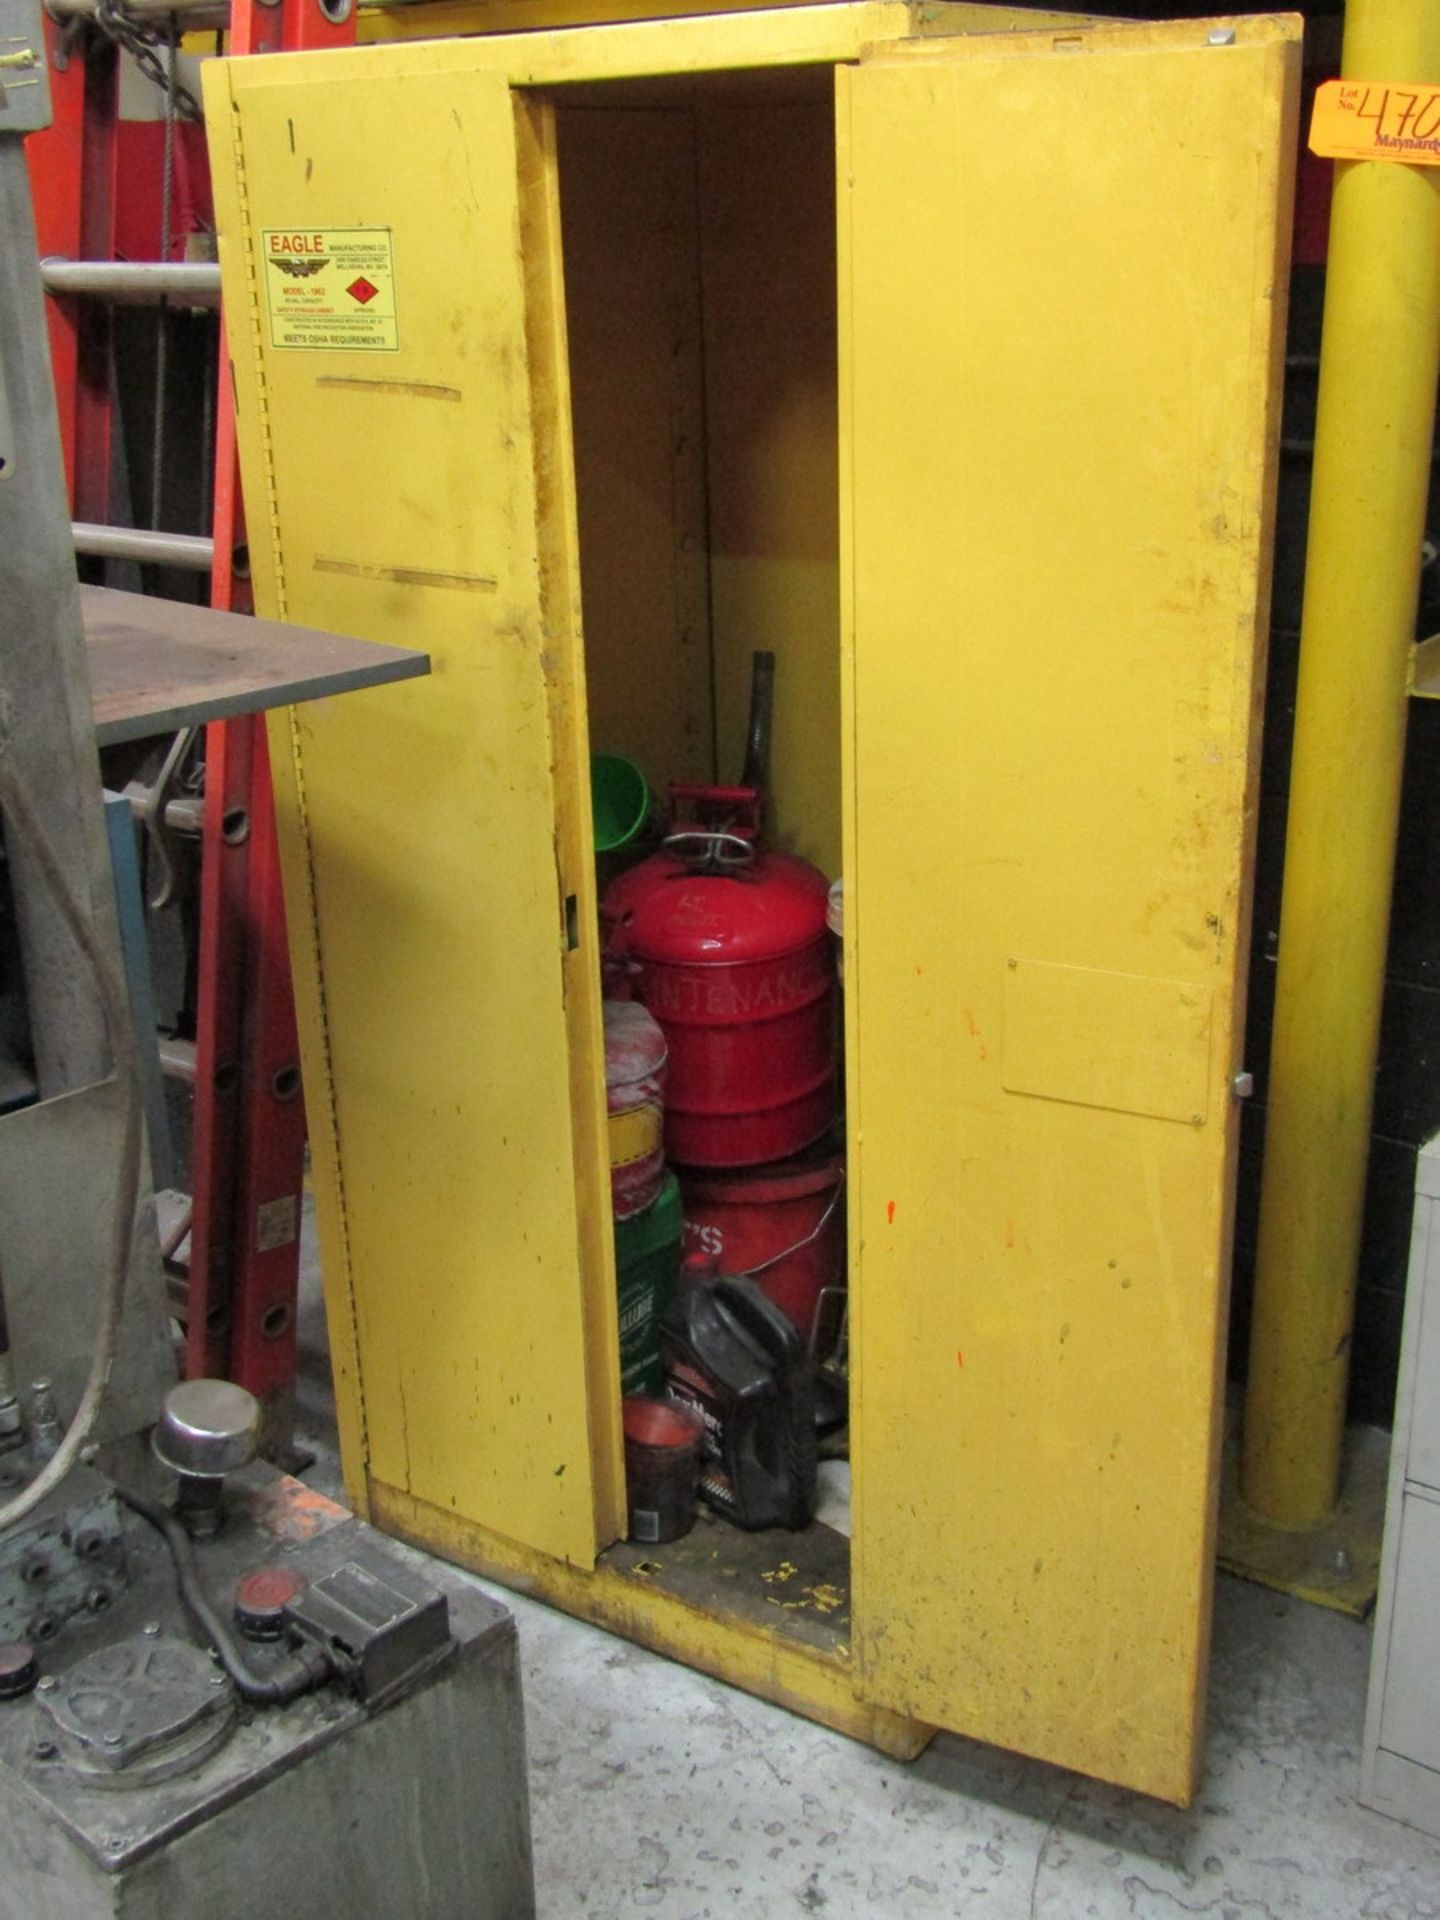 Eagle 1962 Flammable Liquid Storage Cabinet - Image 2 of 3